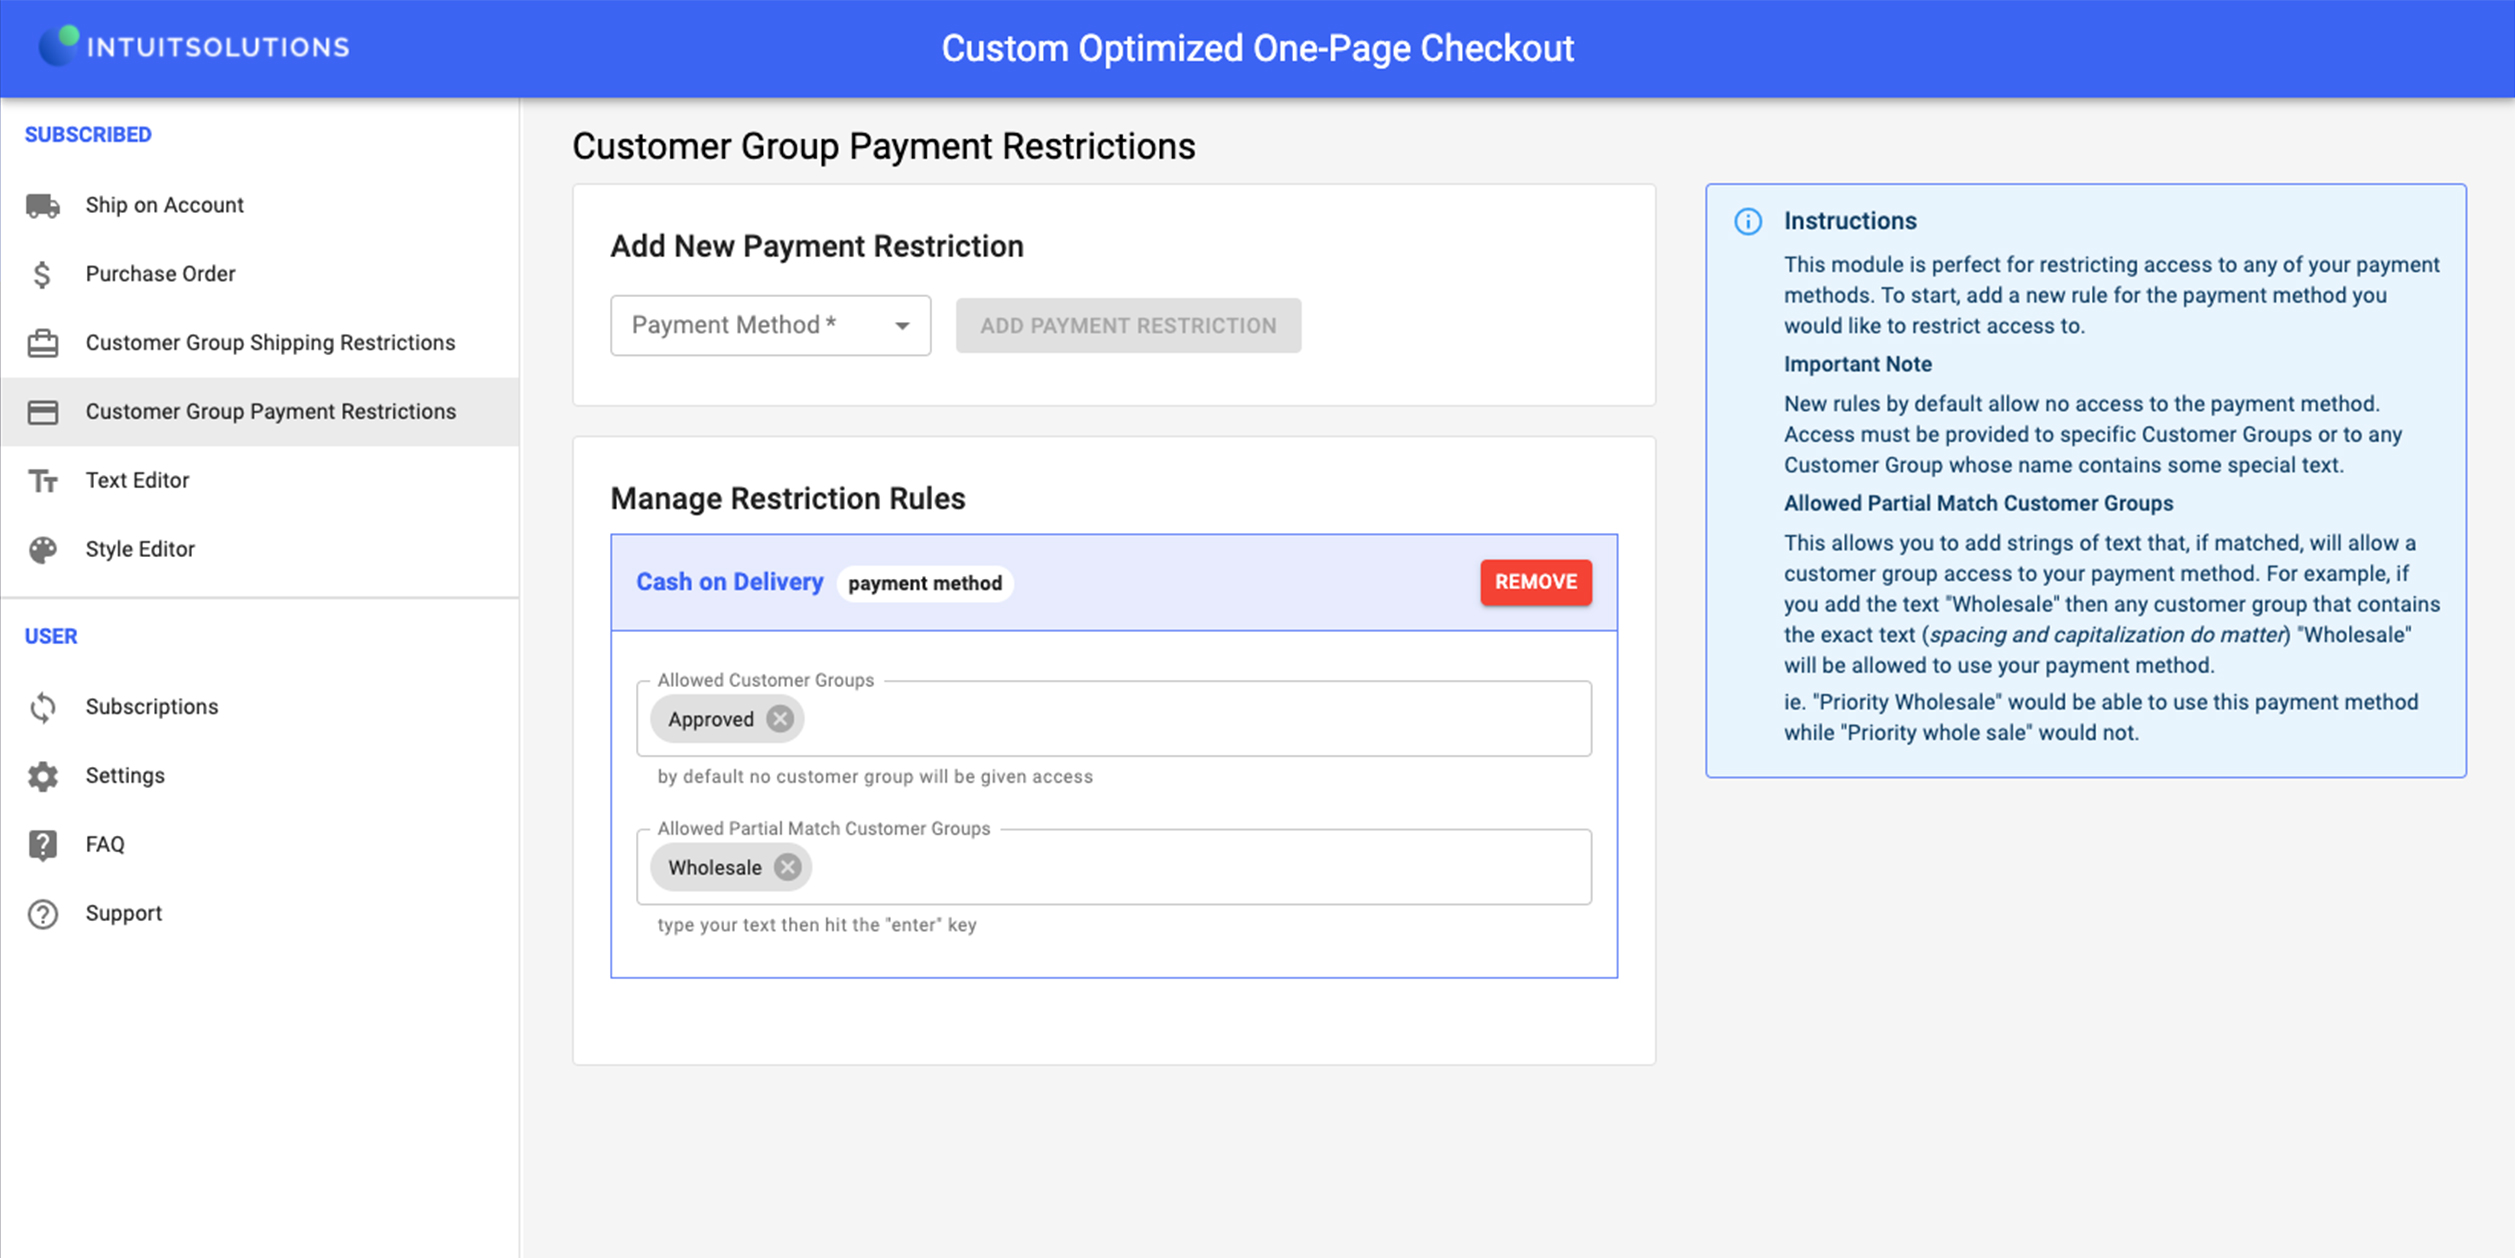 Customer Group Payment Rules configuration panel